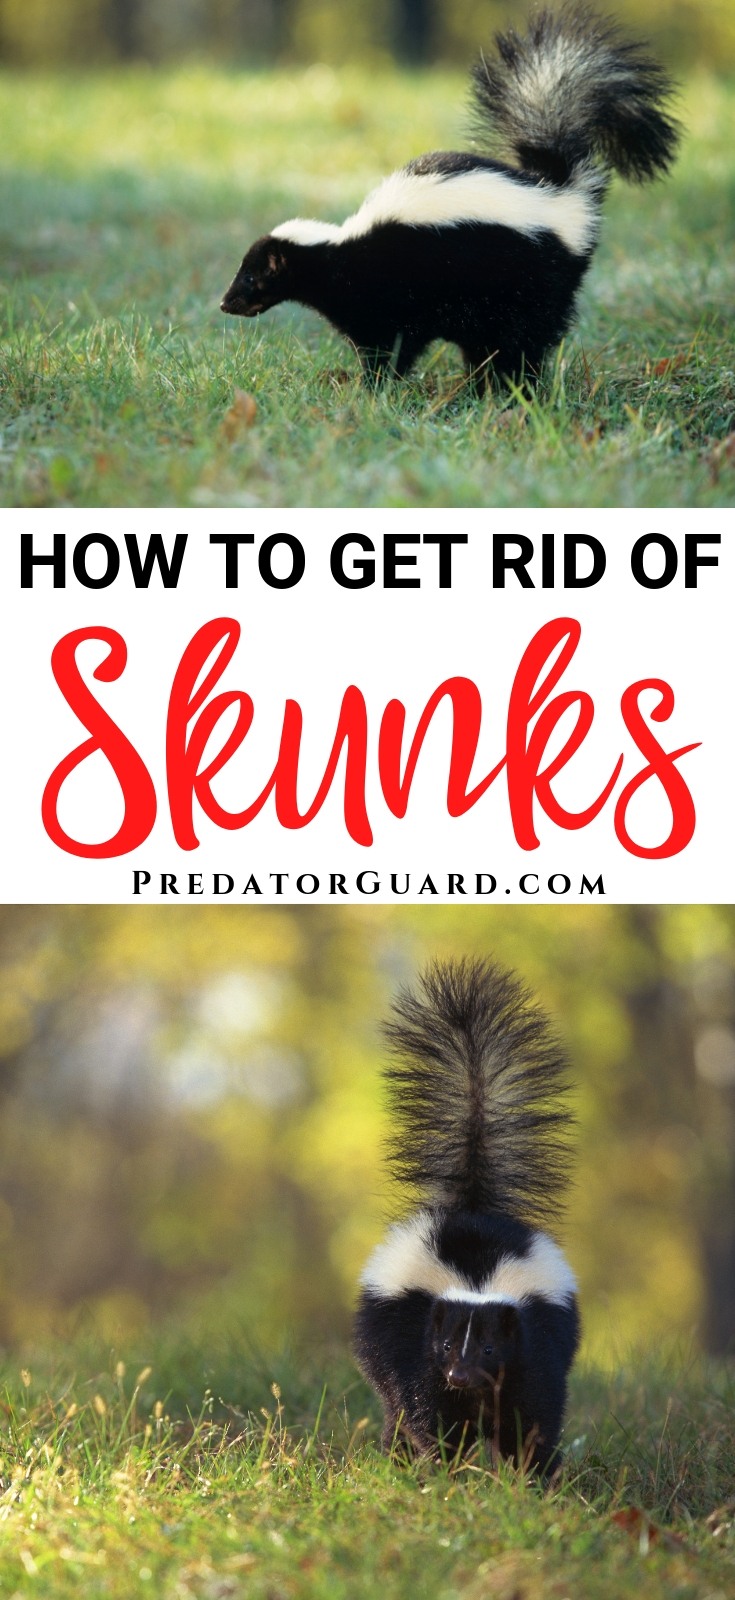 How-To-Get-Rid-of-Skunks-Long